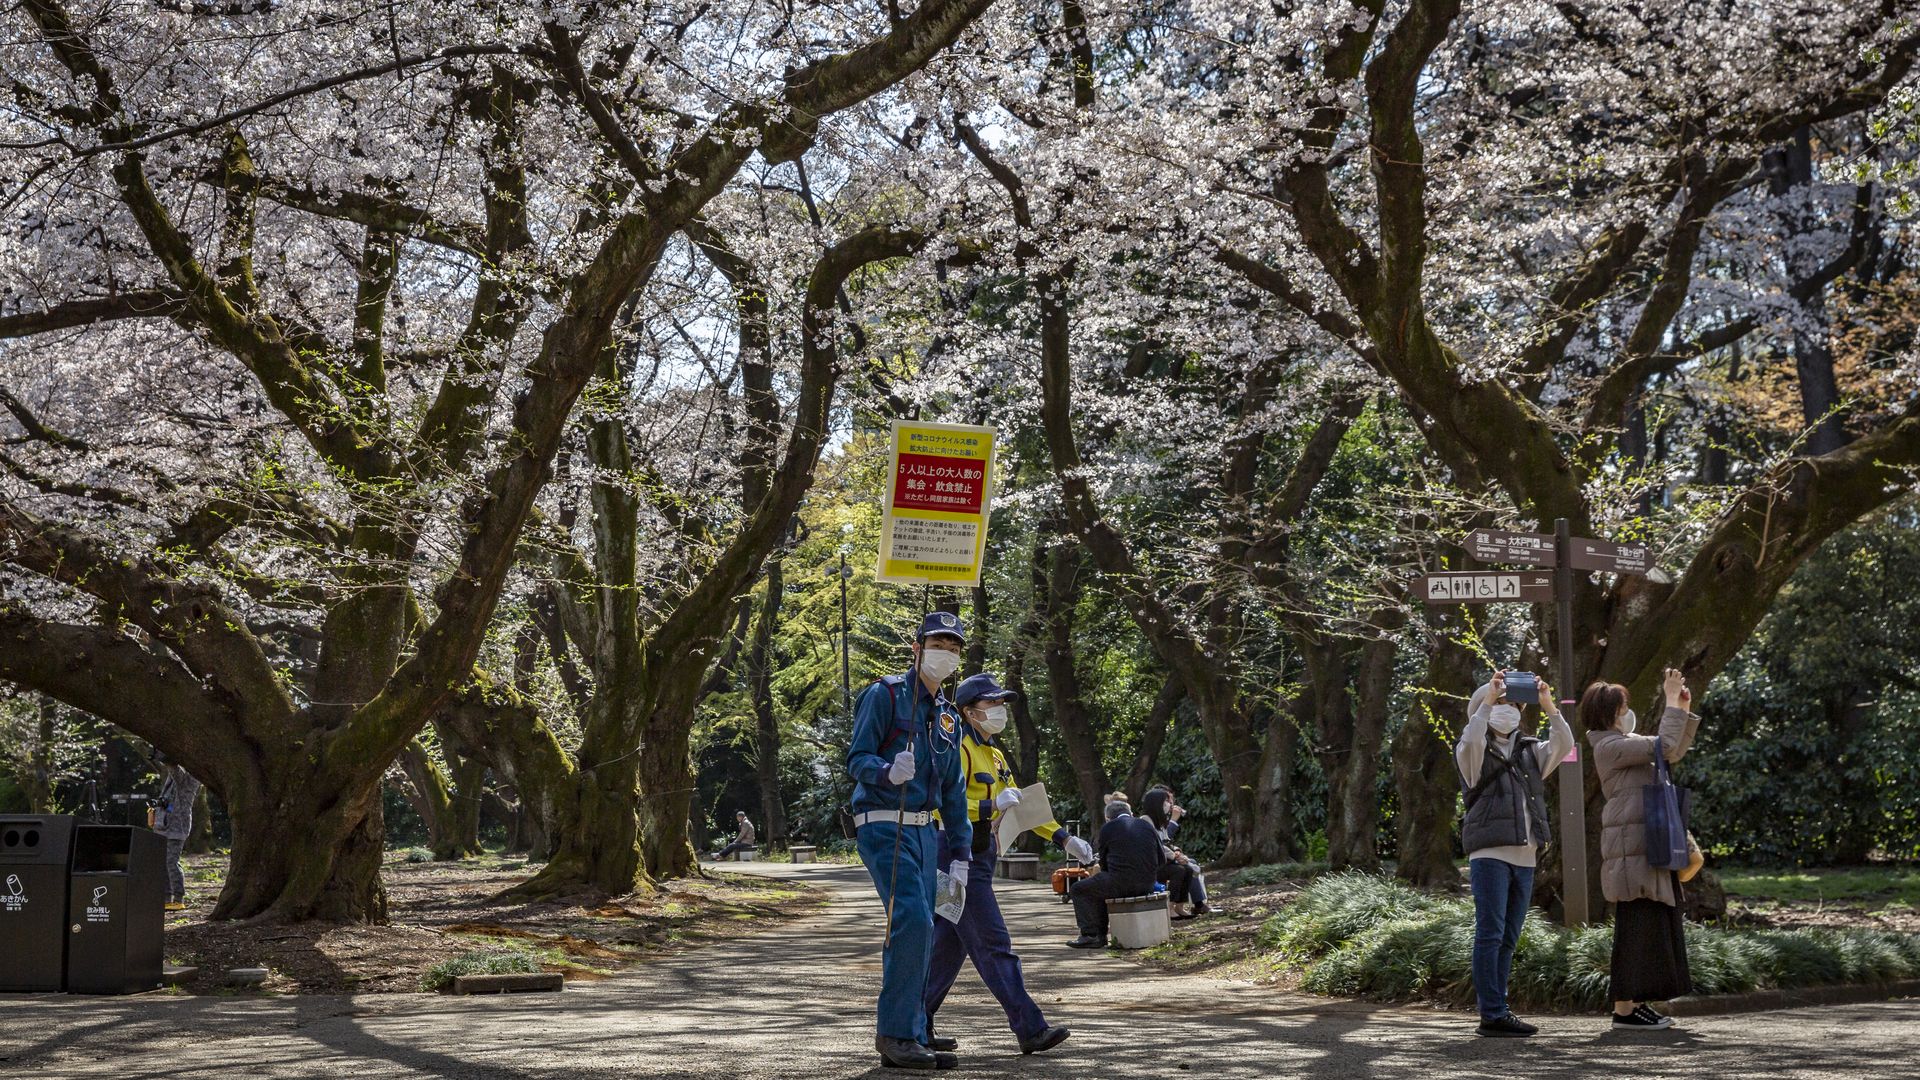 A security staff holds a sign advising against viewing parties with more than five people during the cherry blossom bloom on March 23, 2021 in Tokyo, Japan